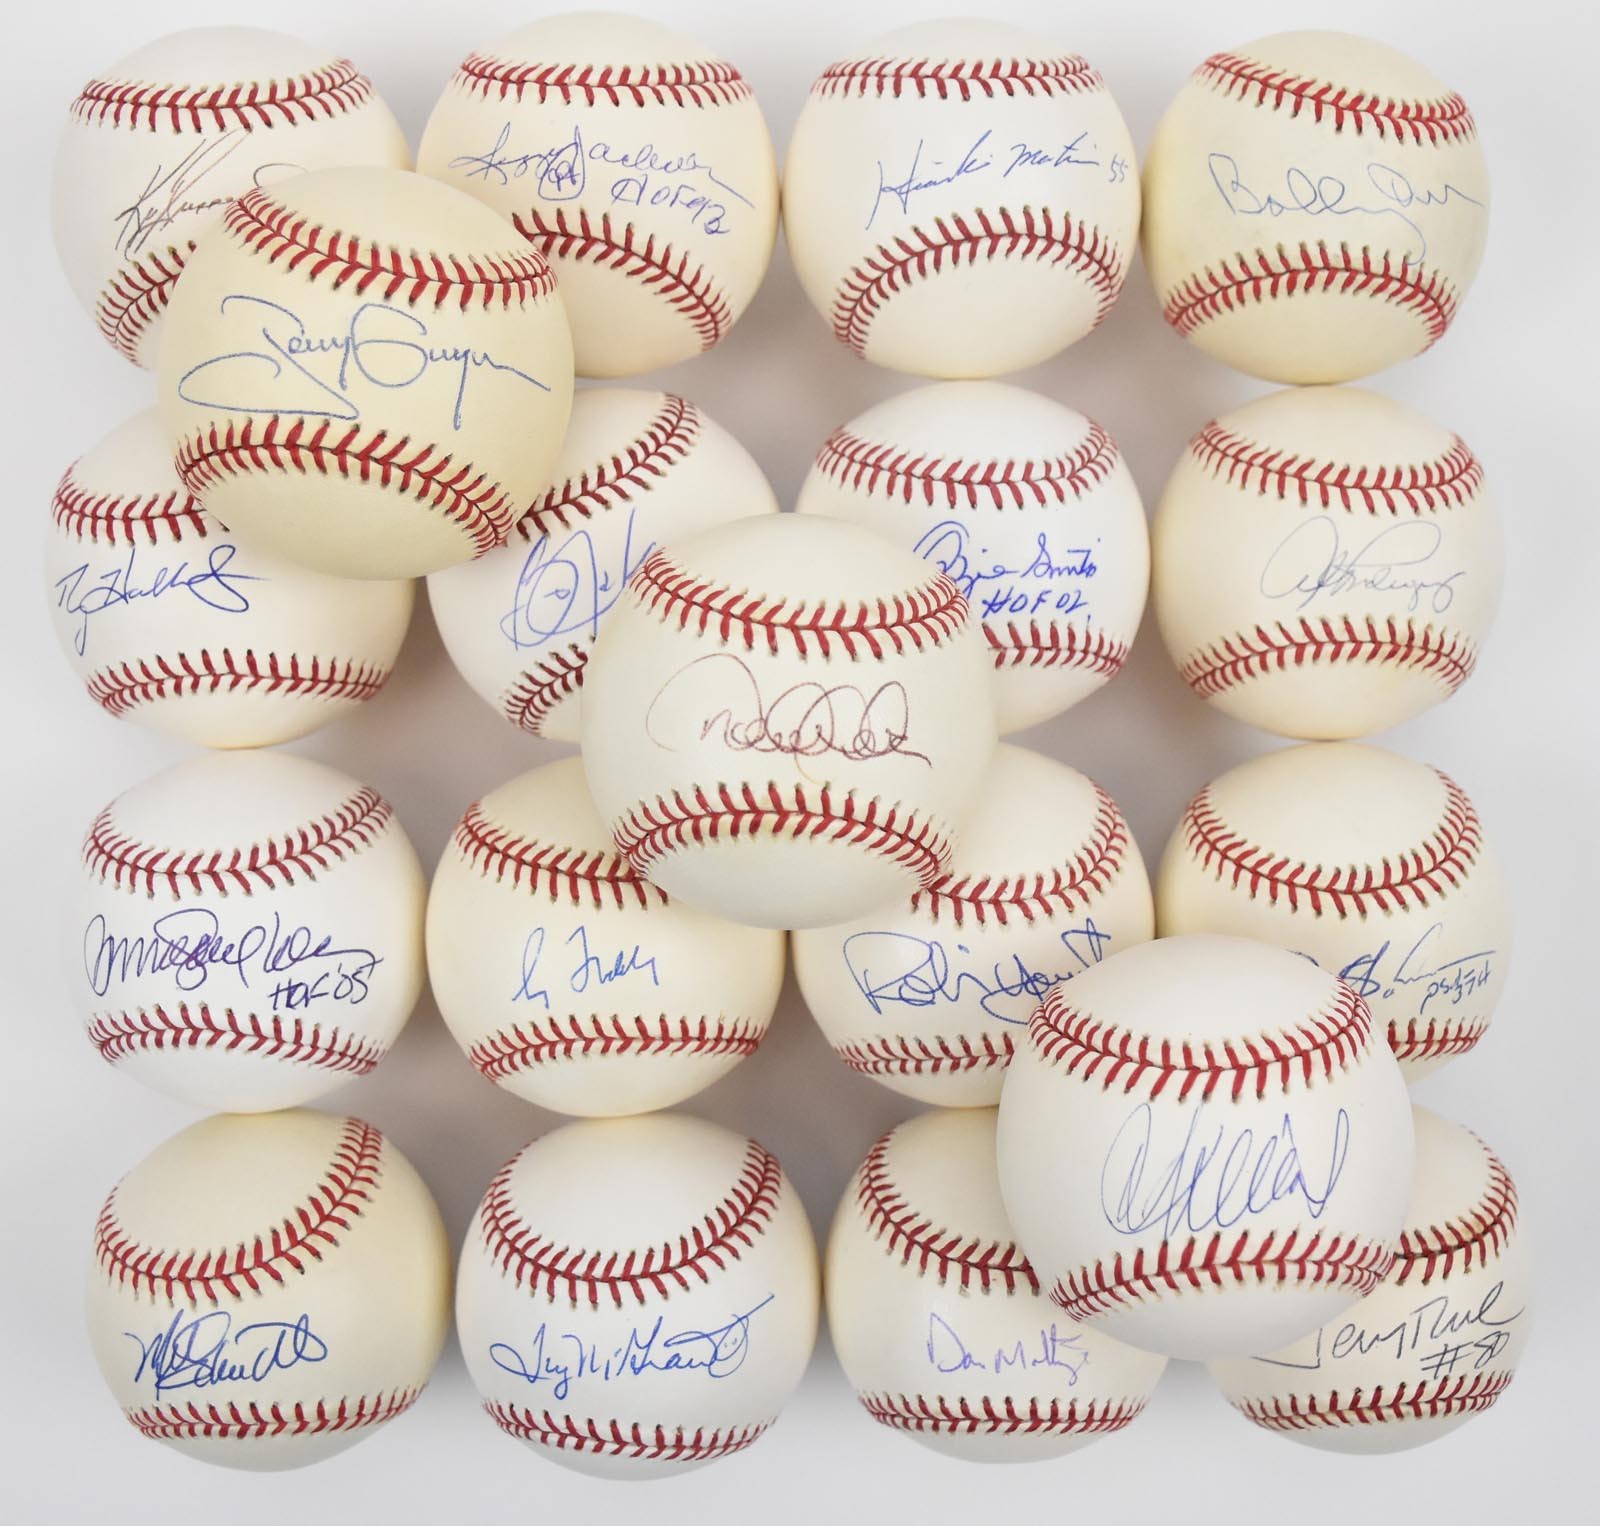 Large Single Signed Baseball Collection with Many Hall of Famers - Jeter, Ichiro, Orr, Griffey Jr. (145+)